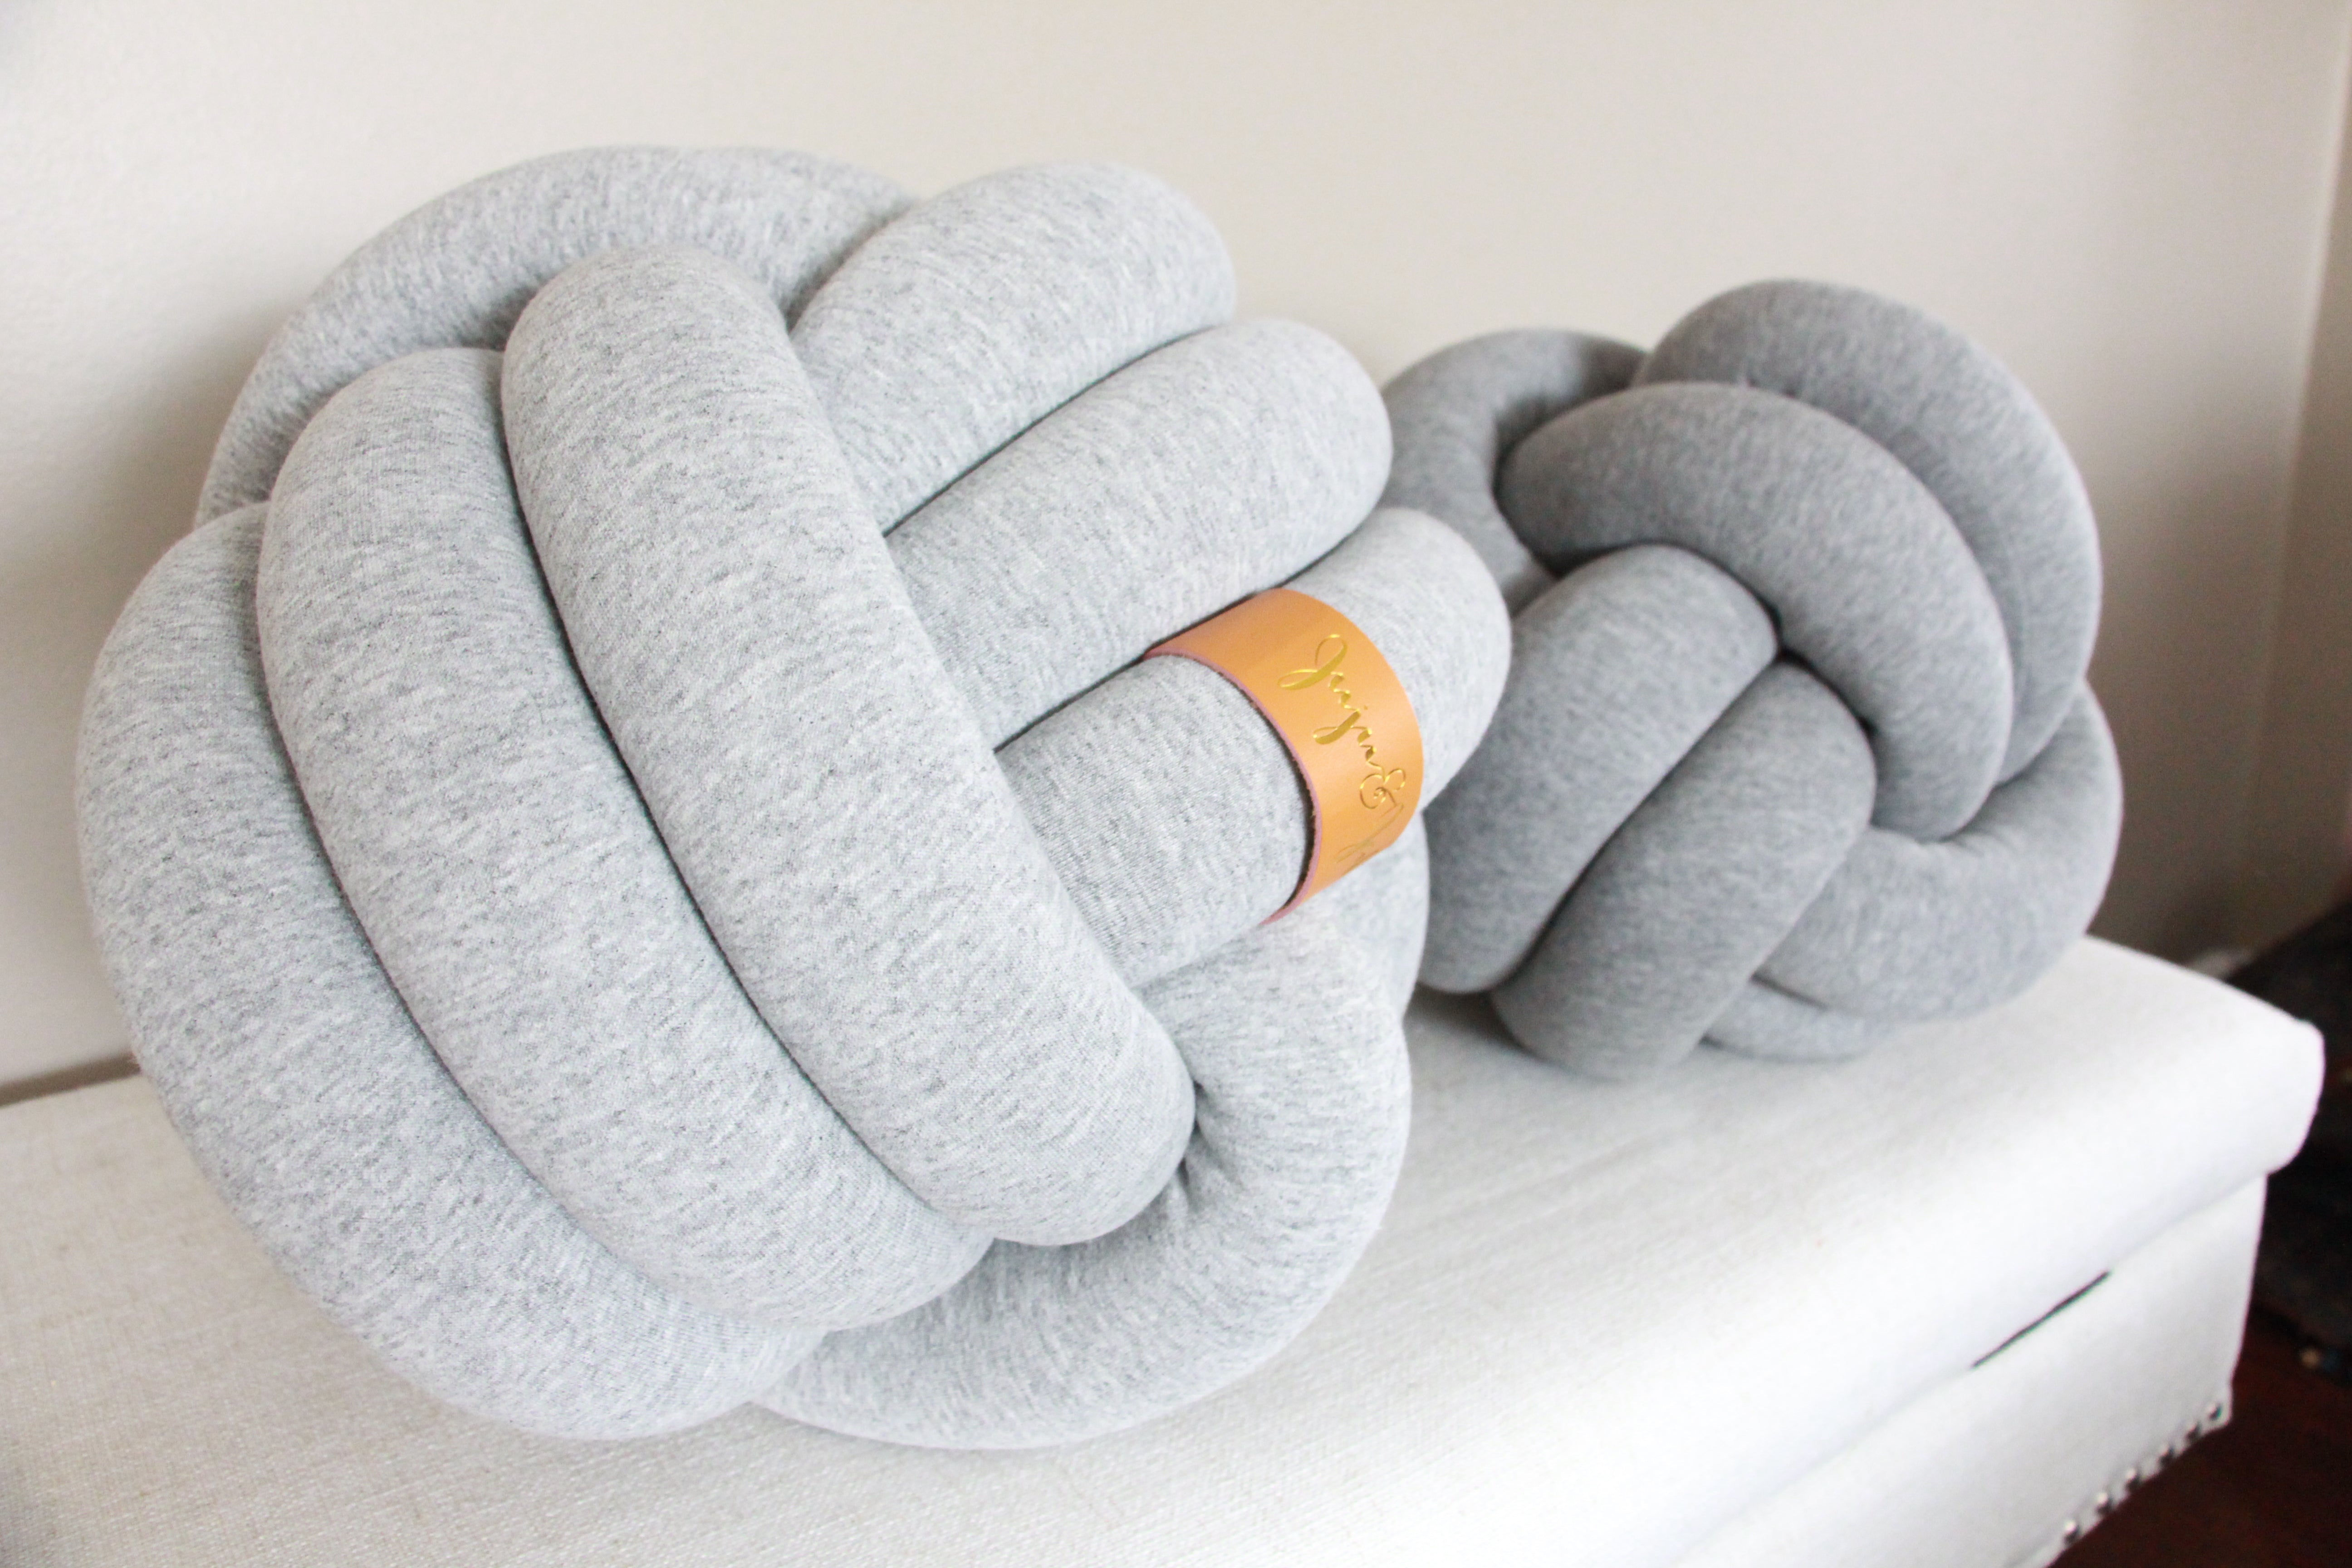 Grande Sphere Knot Pillow - See more Knot Pillows & Cushions at JujuAndJake.com